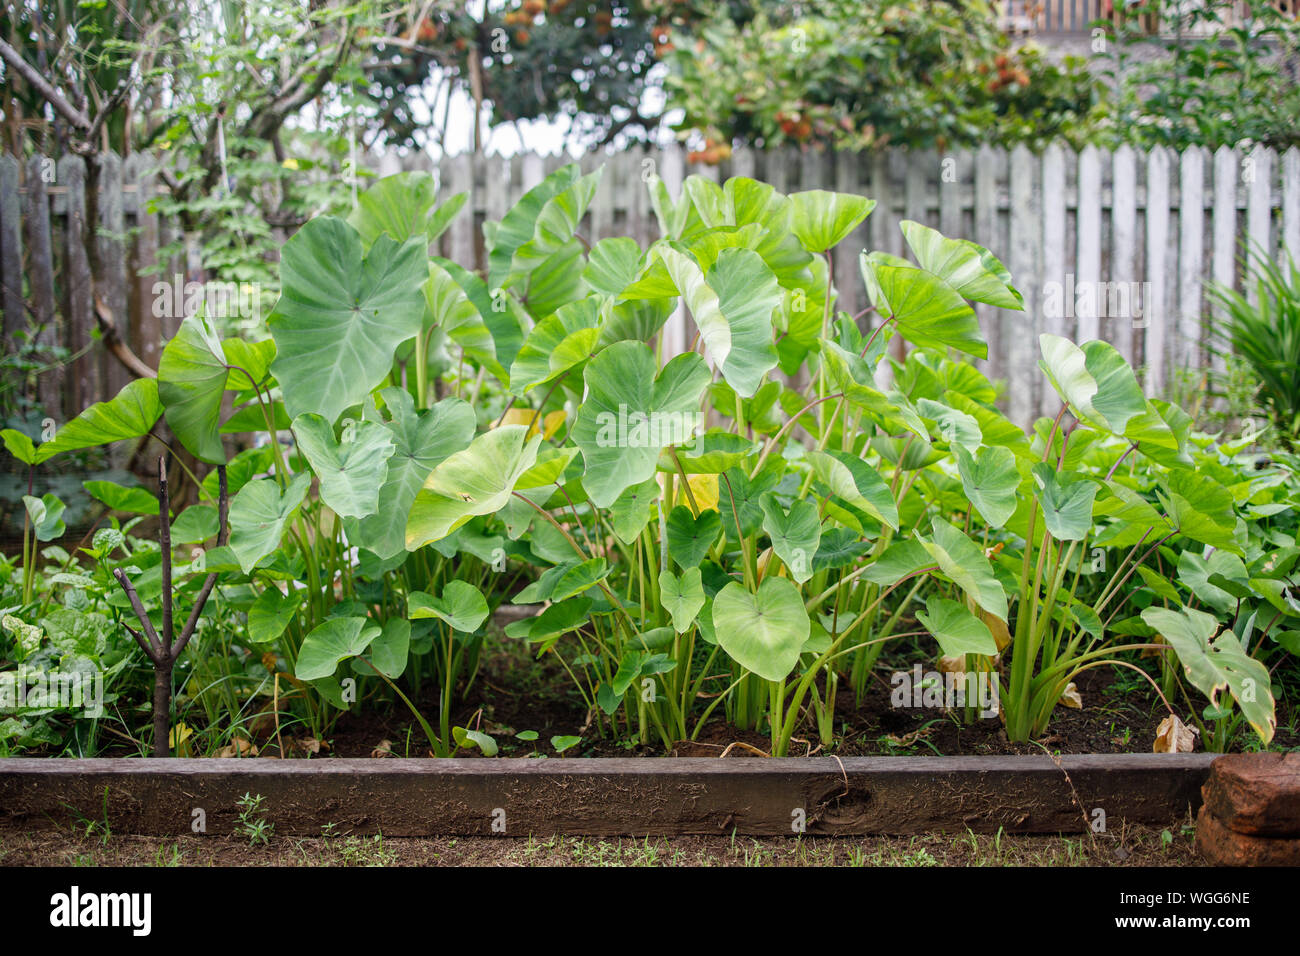 A Large Yam Plant Seen in a Garden Stock Photo